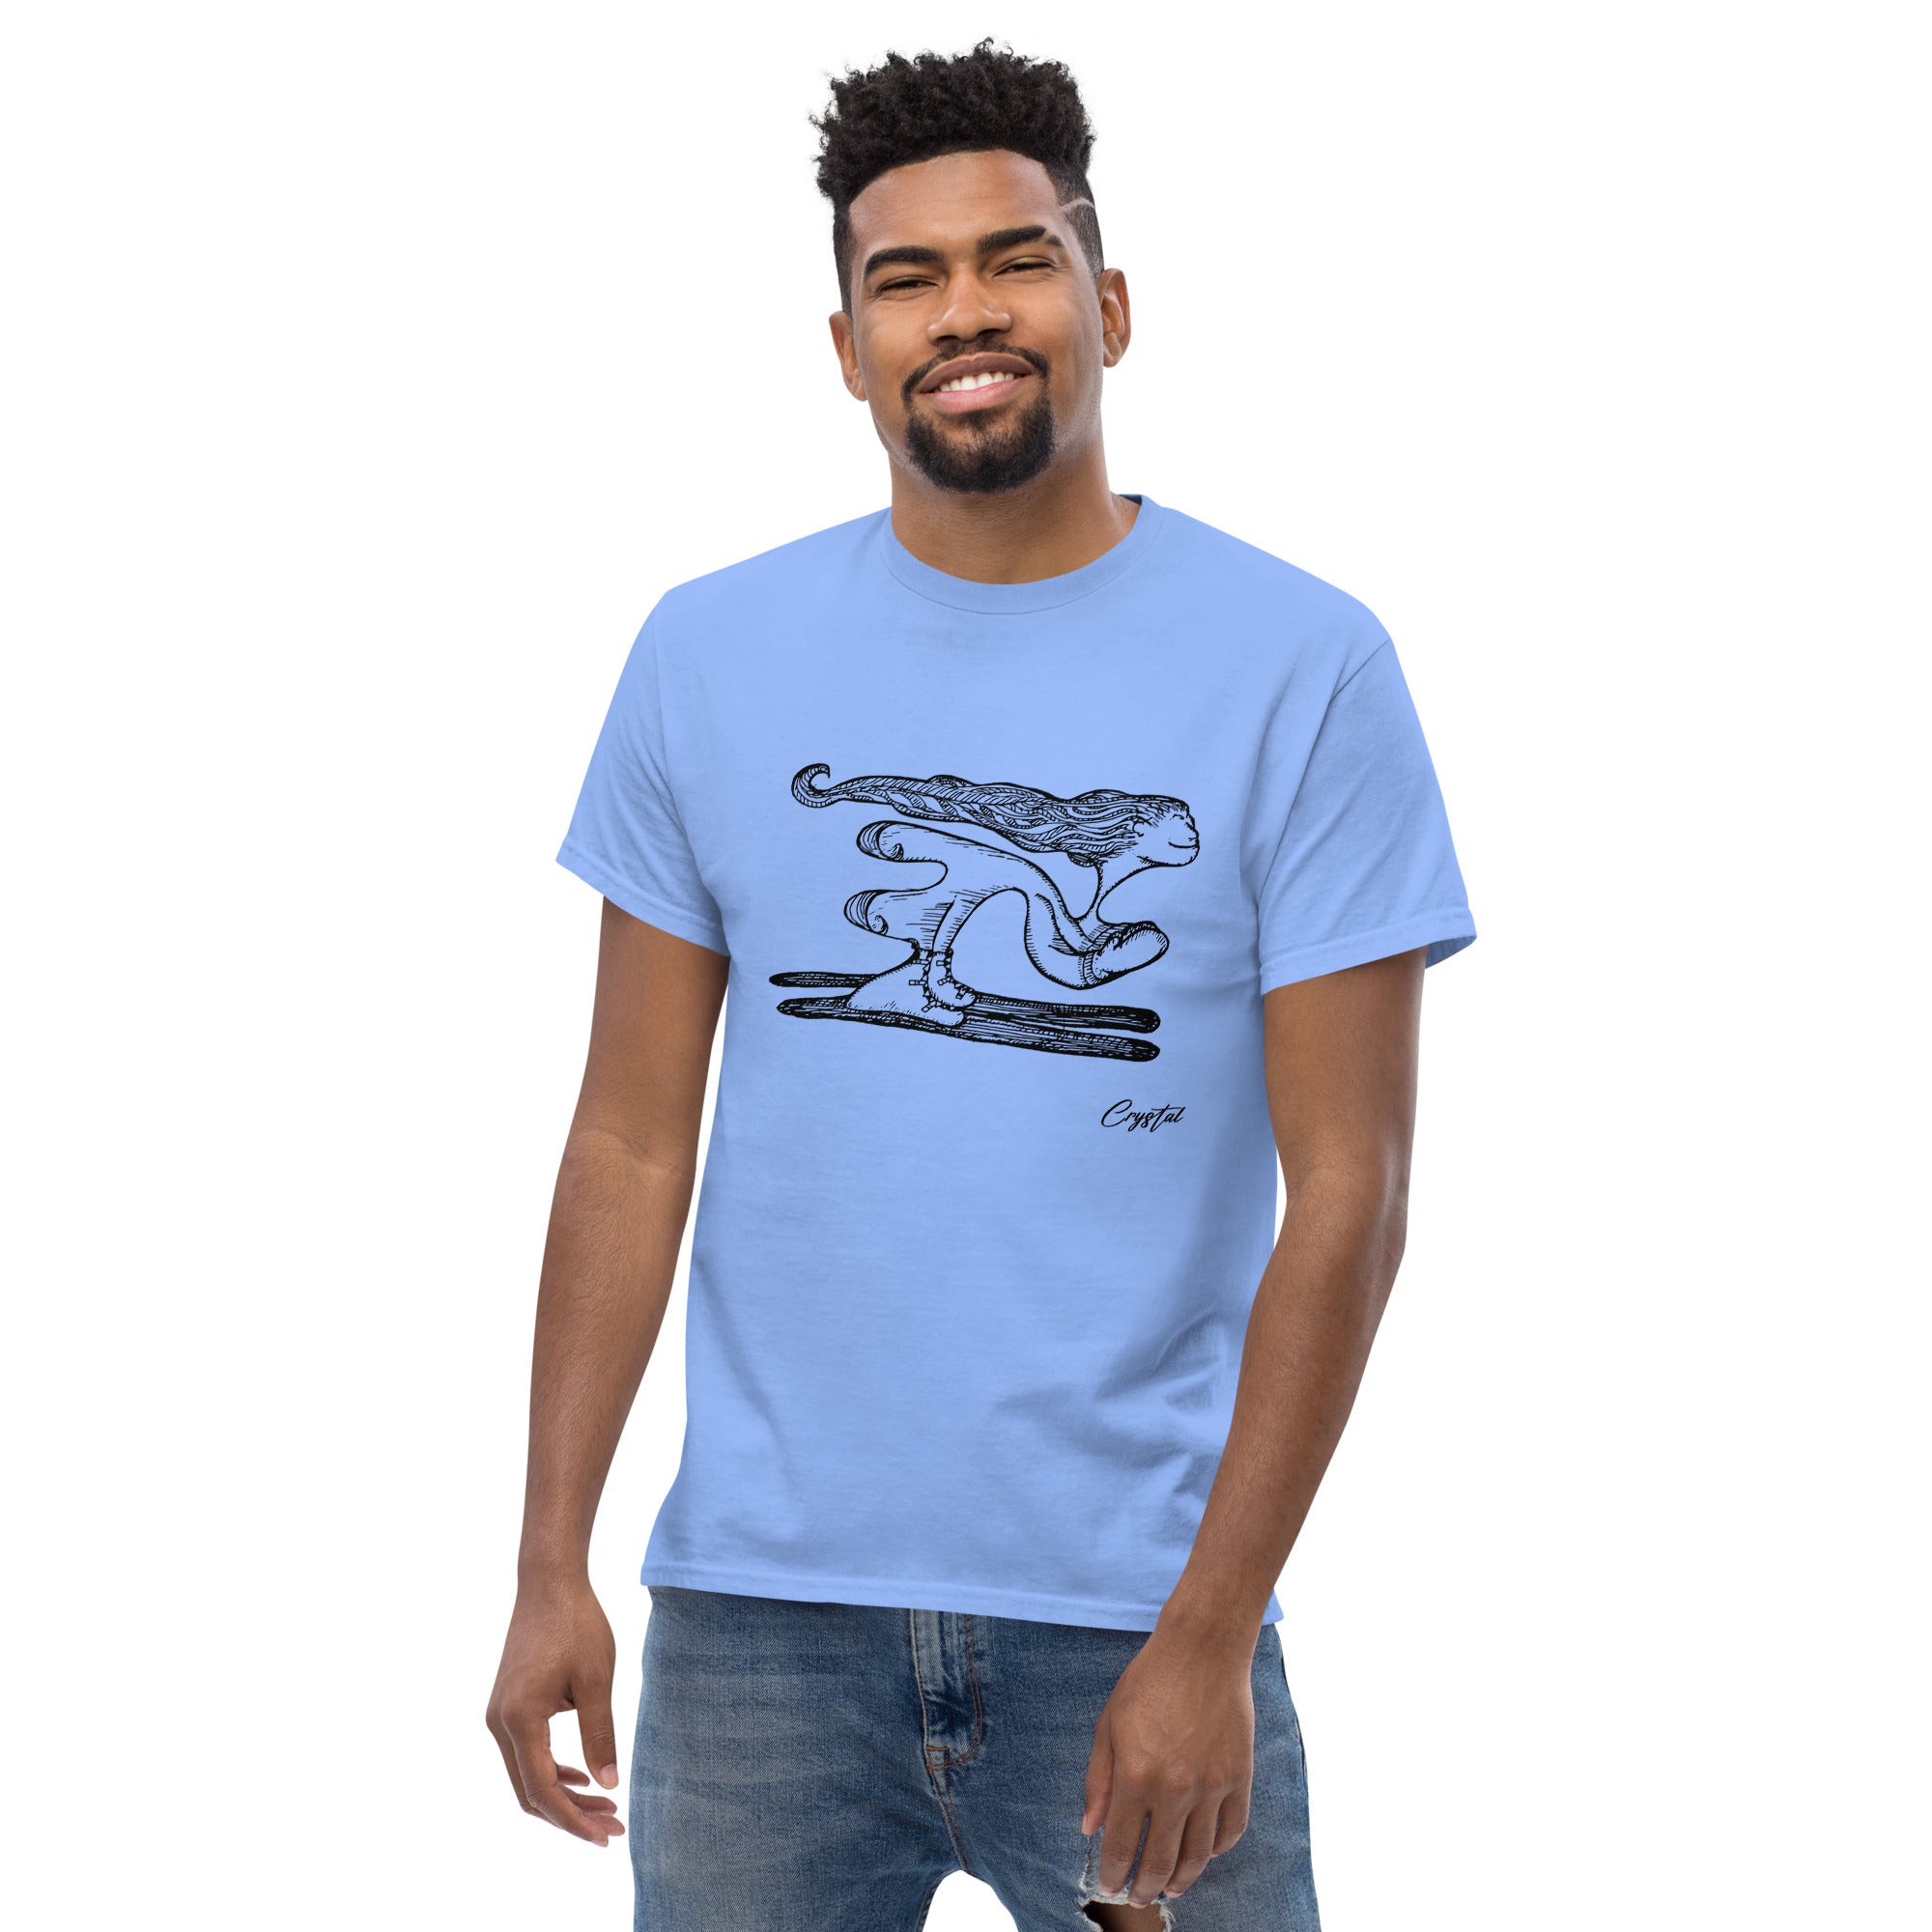 Girl with Great Hair Skiing Snow Slopes and Smiling - Cute & Creepy "Stay Weird" Cartoon Illustration Men's classic tee